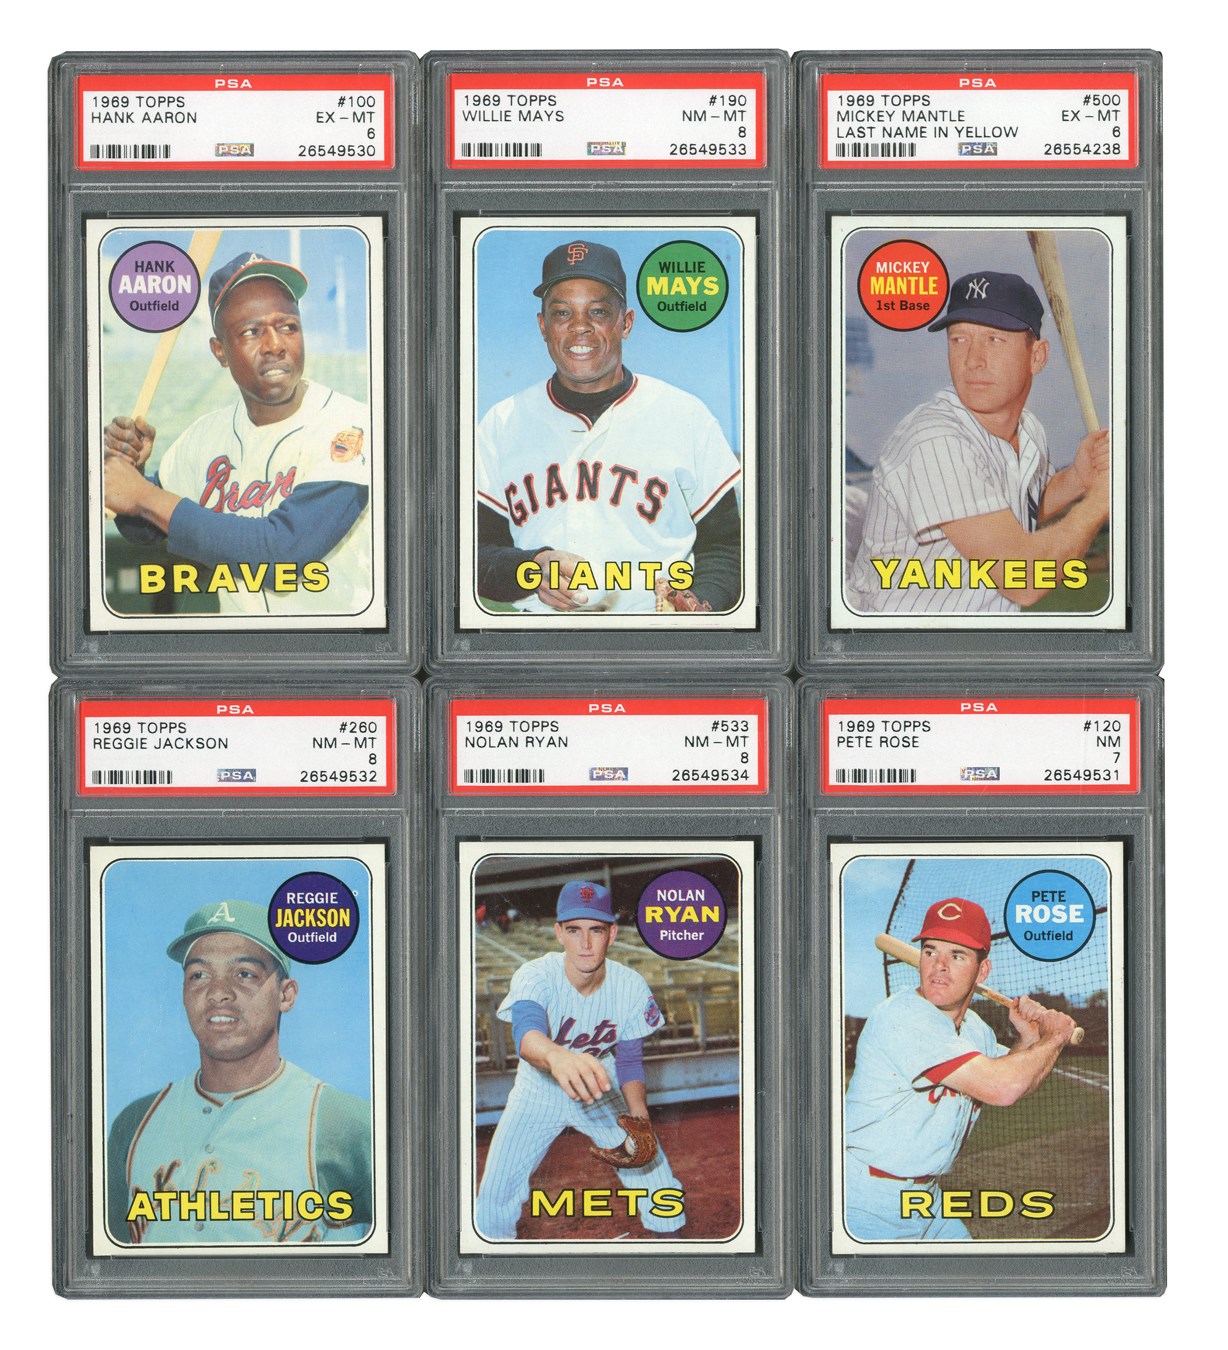 1969 Topps High Grade Complete Set (664) with SIX PSA Graded